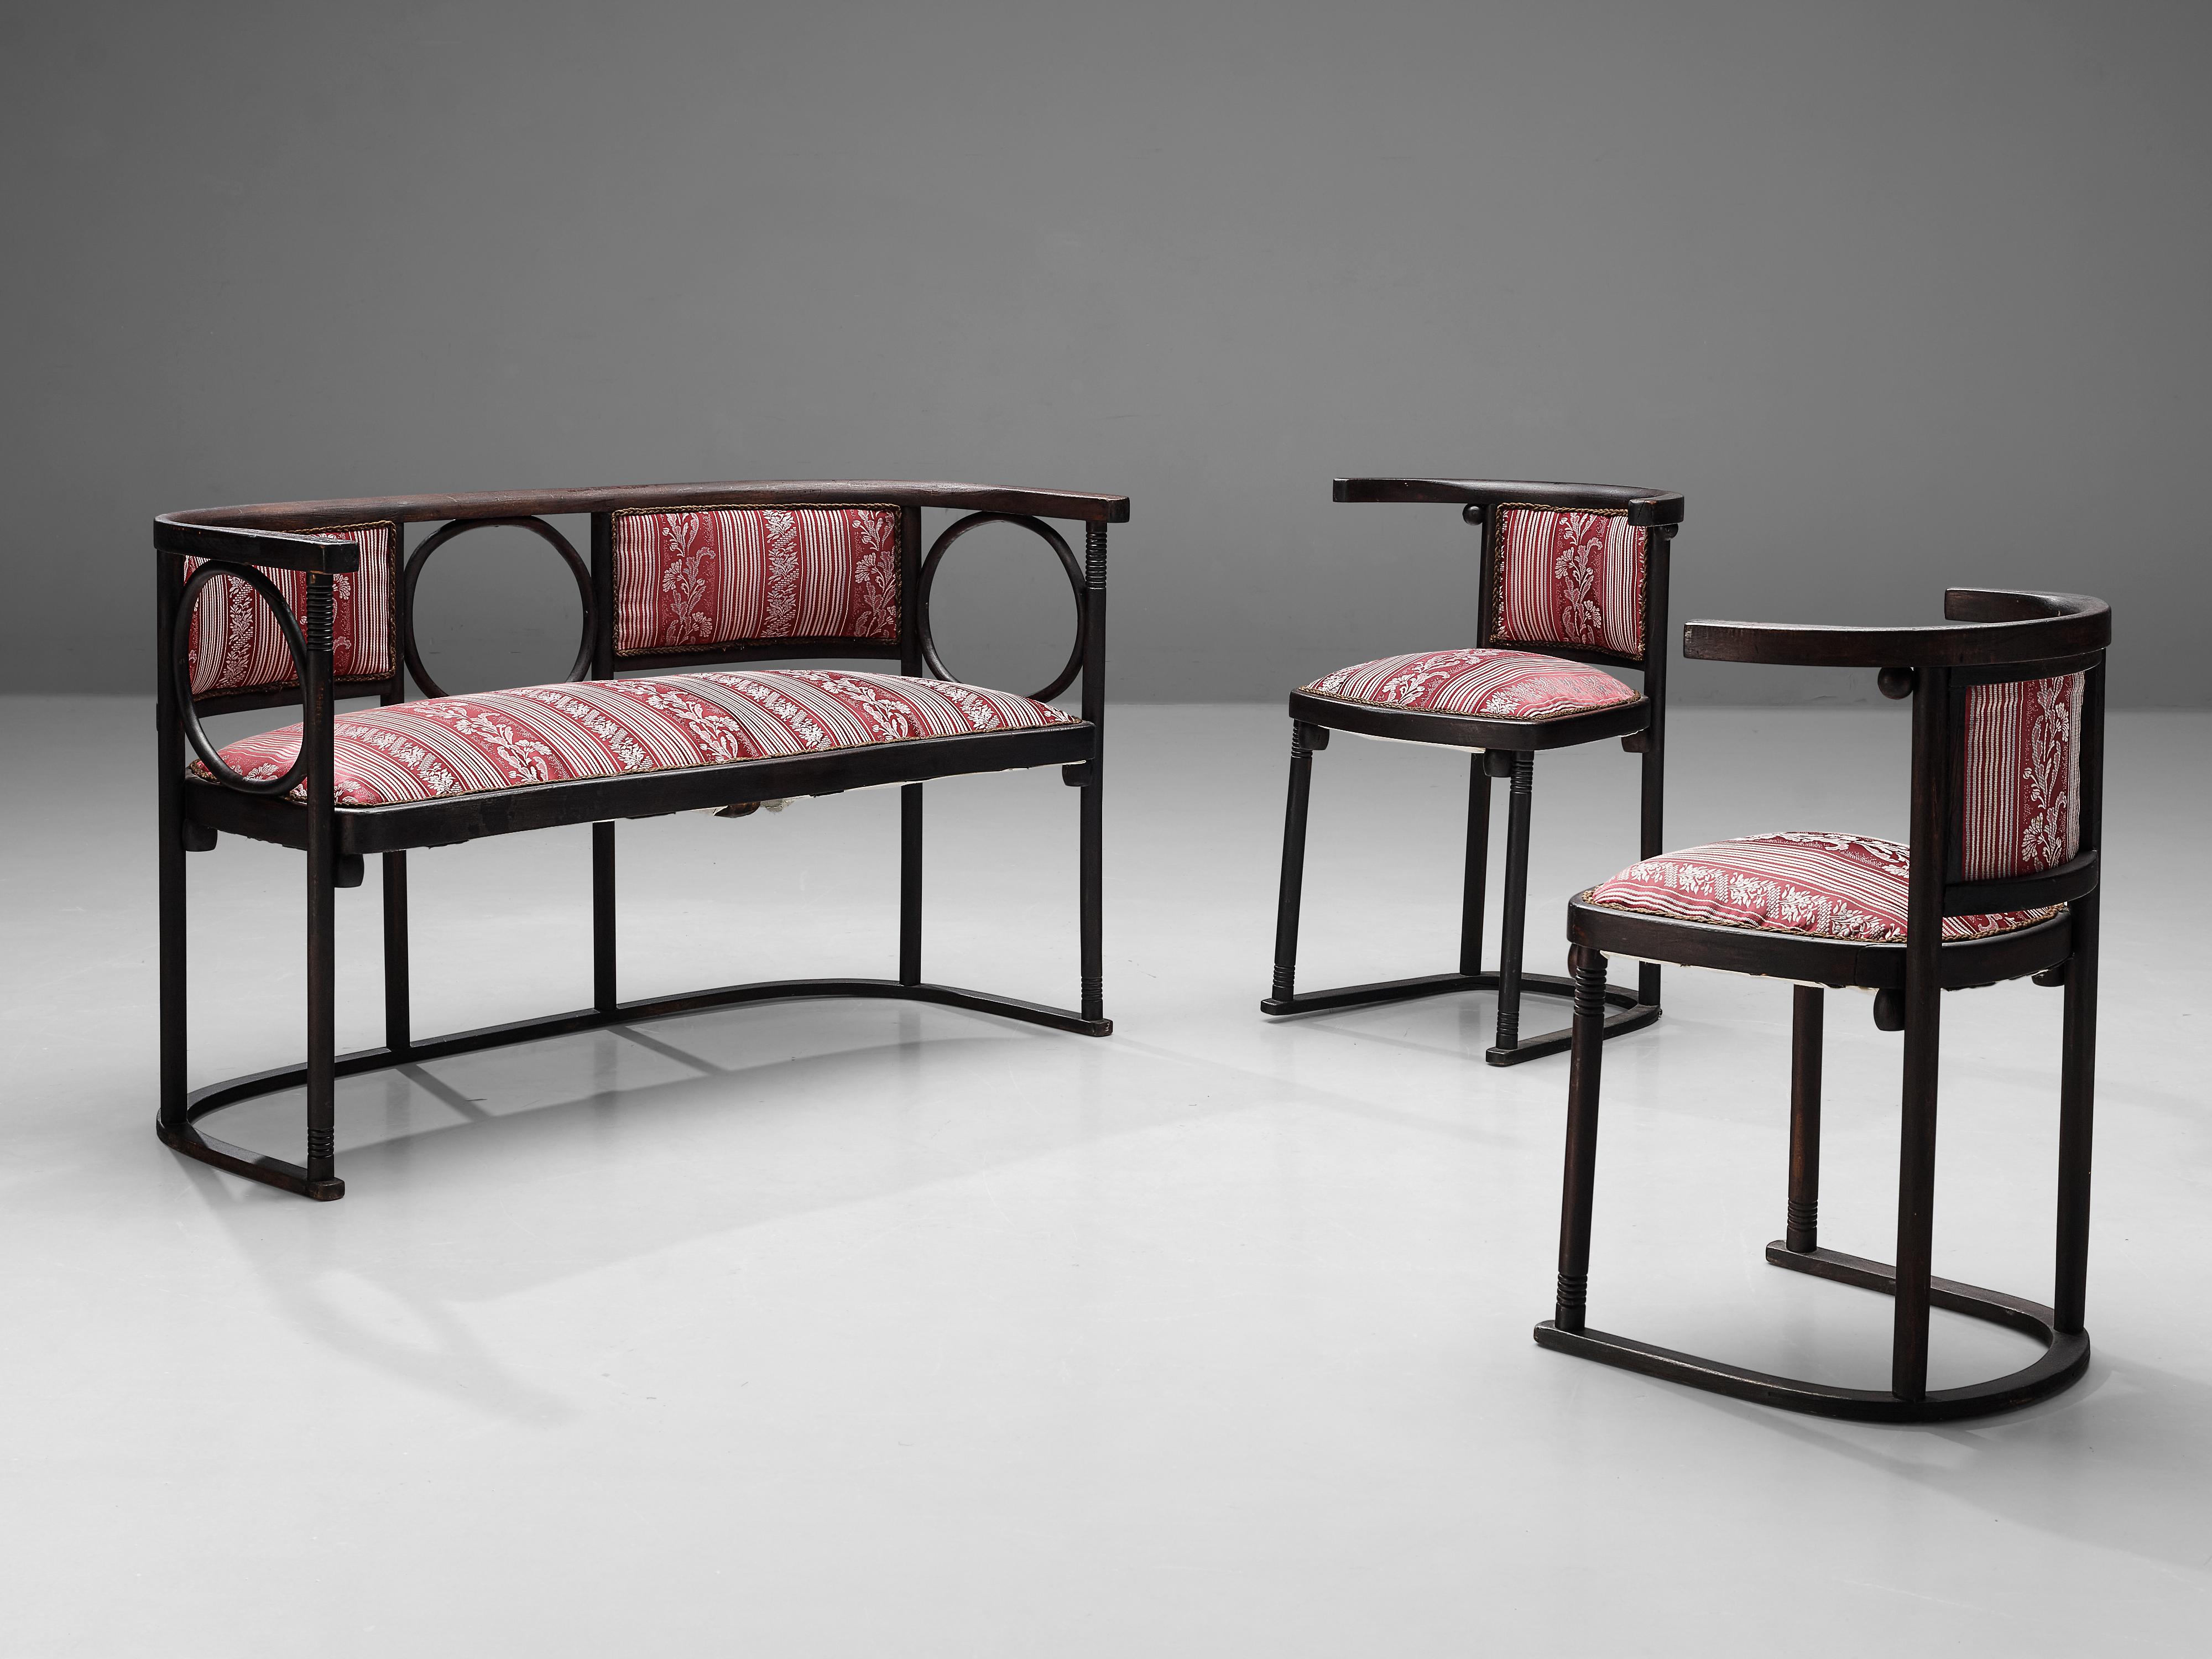 Josef Hoffmann ‘Fledermaus’ Dining Chairs in Floral Upholstery 1